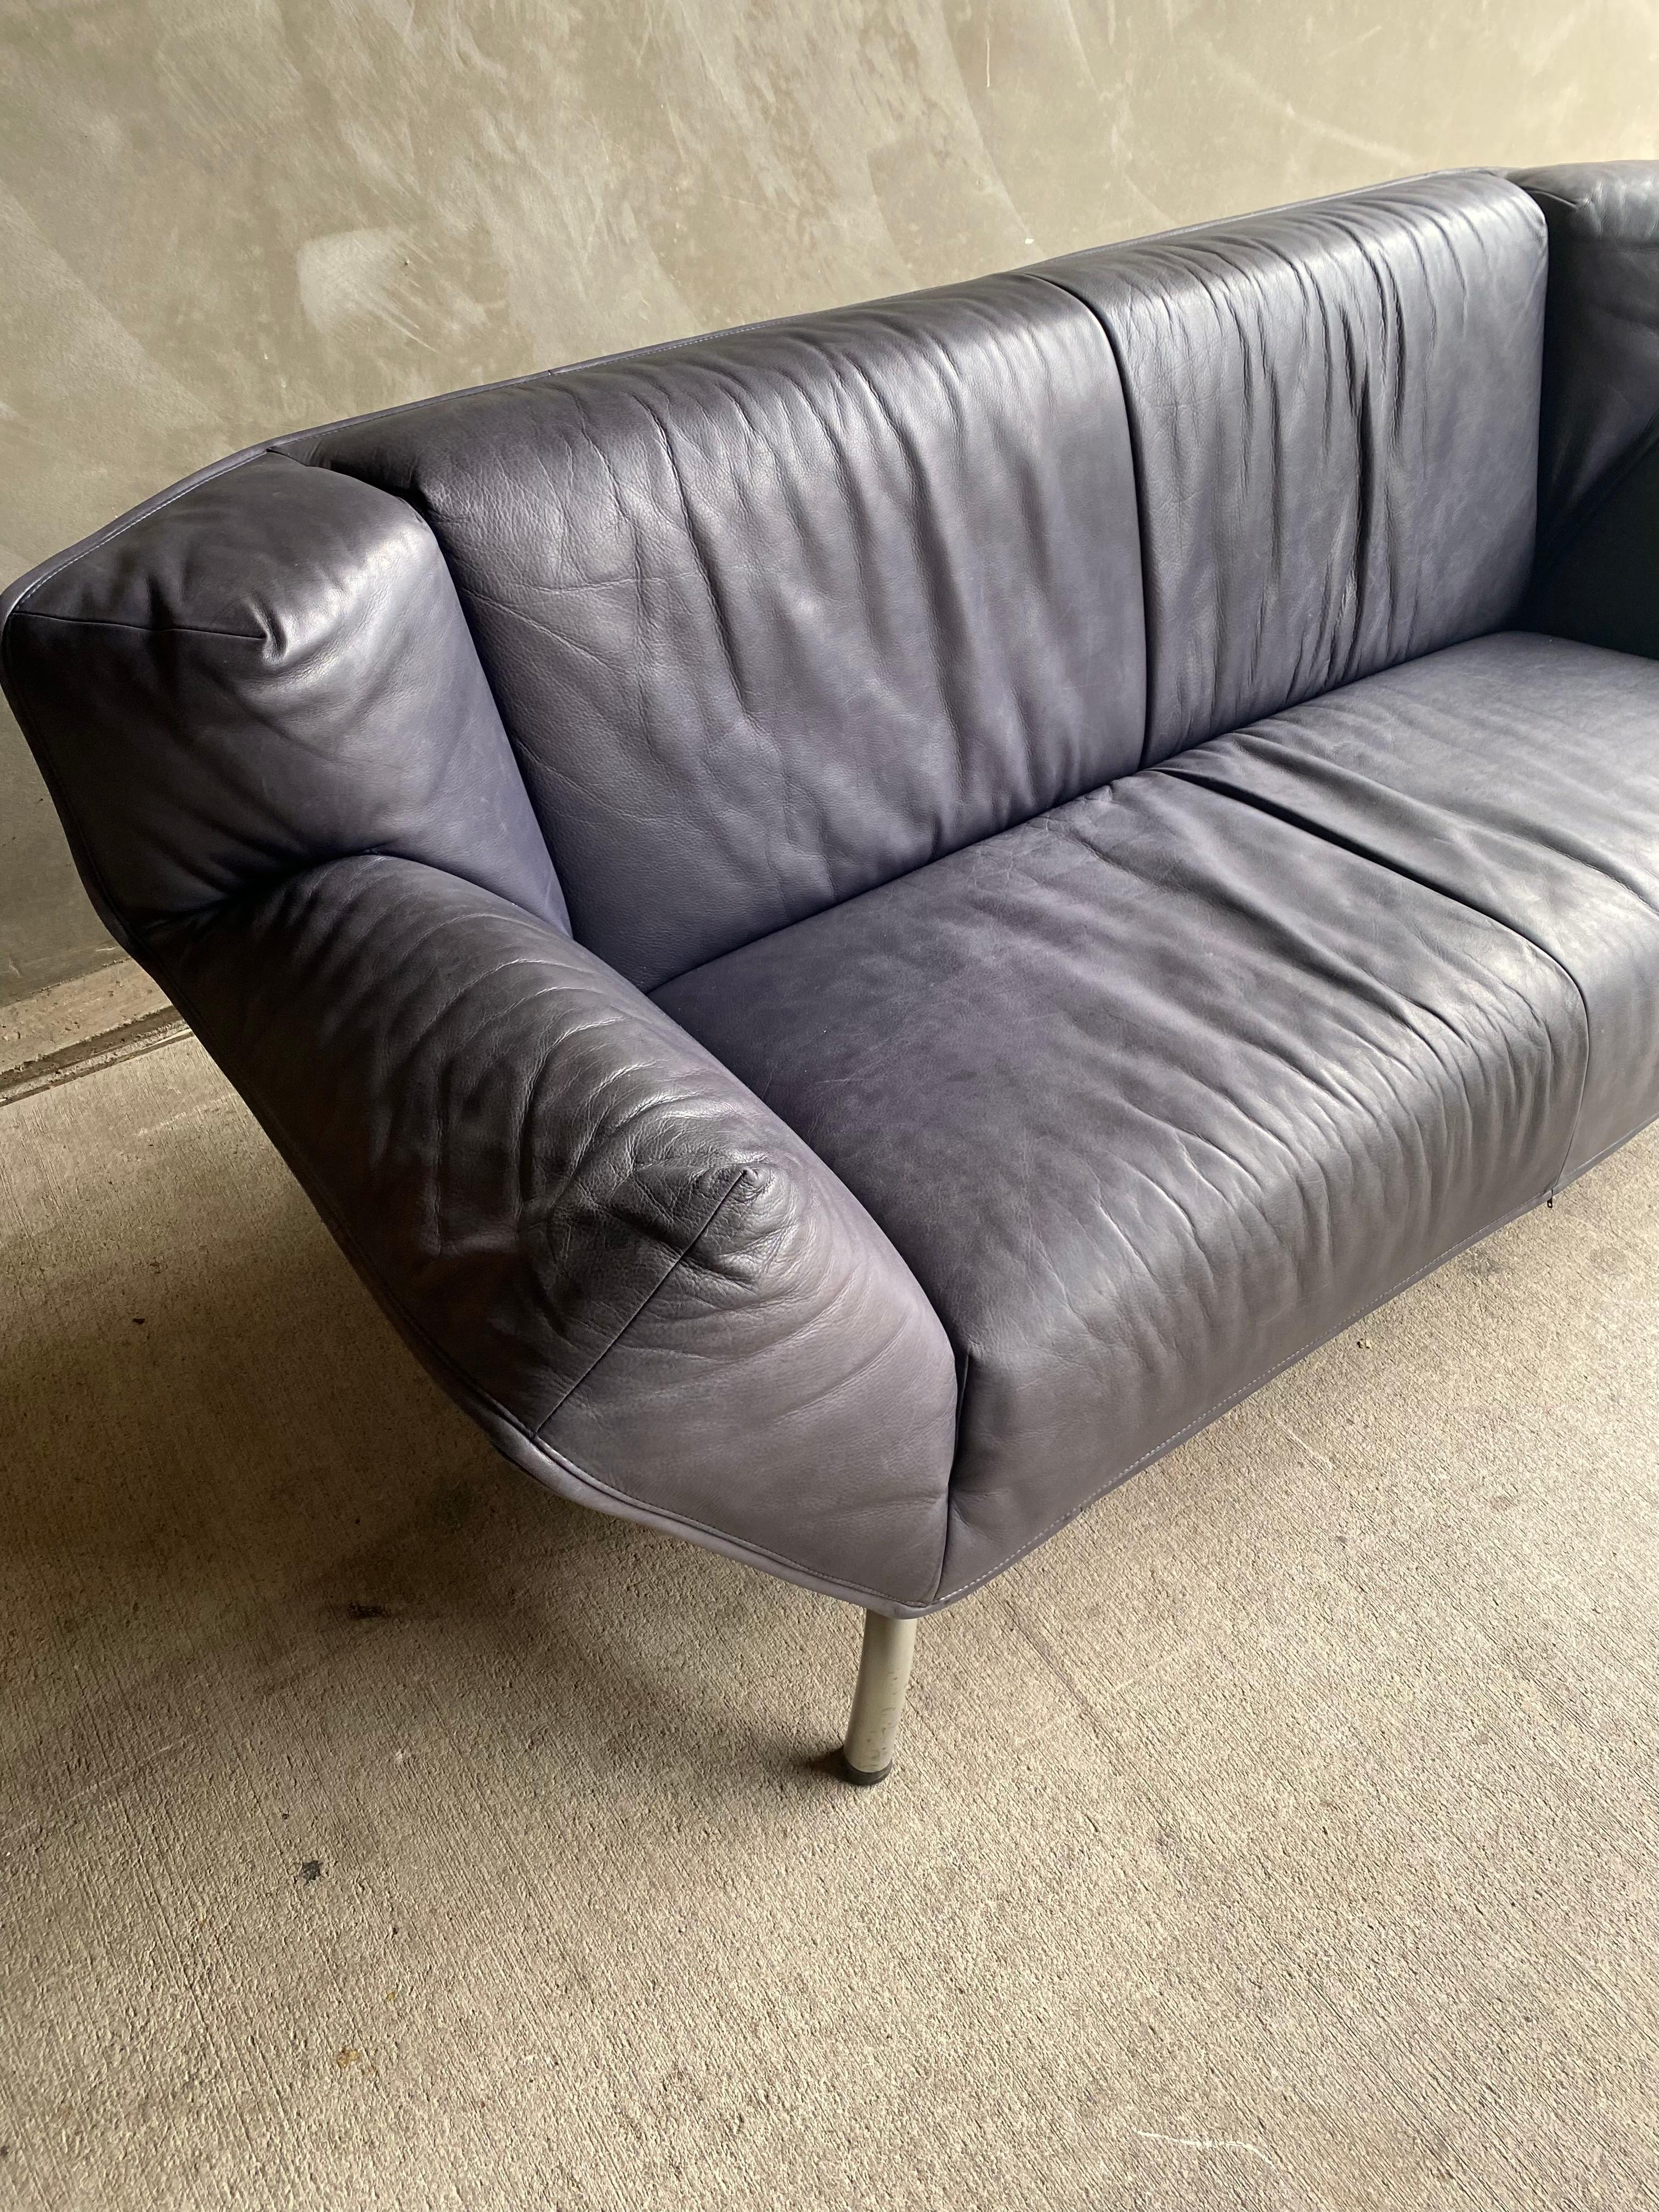 Gerard van den Berg Leather Sofa, NL, 1970-80's, Two Available 4